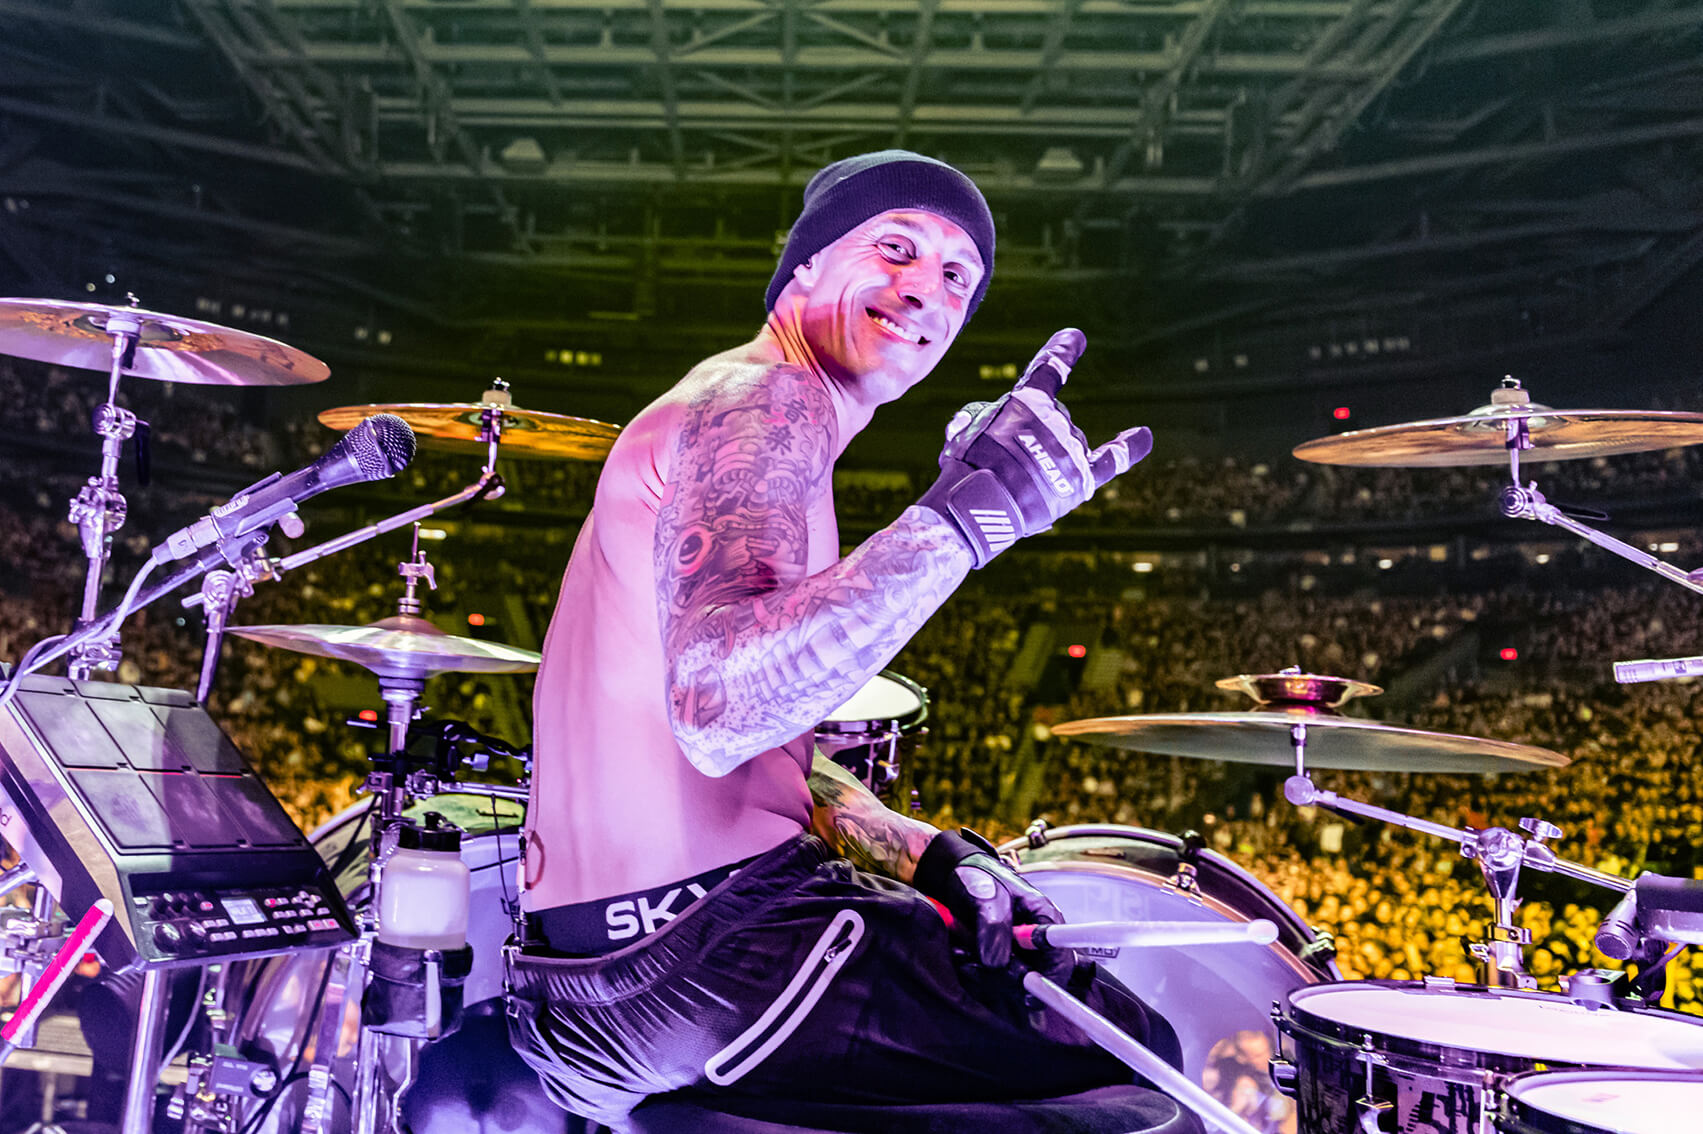 Frank Zummo Visits with School of Rock students on Tour [Video]